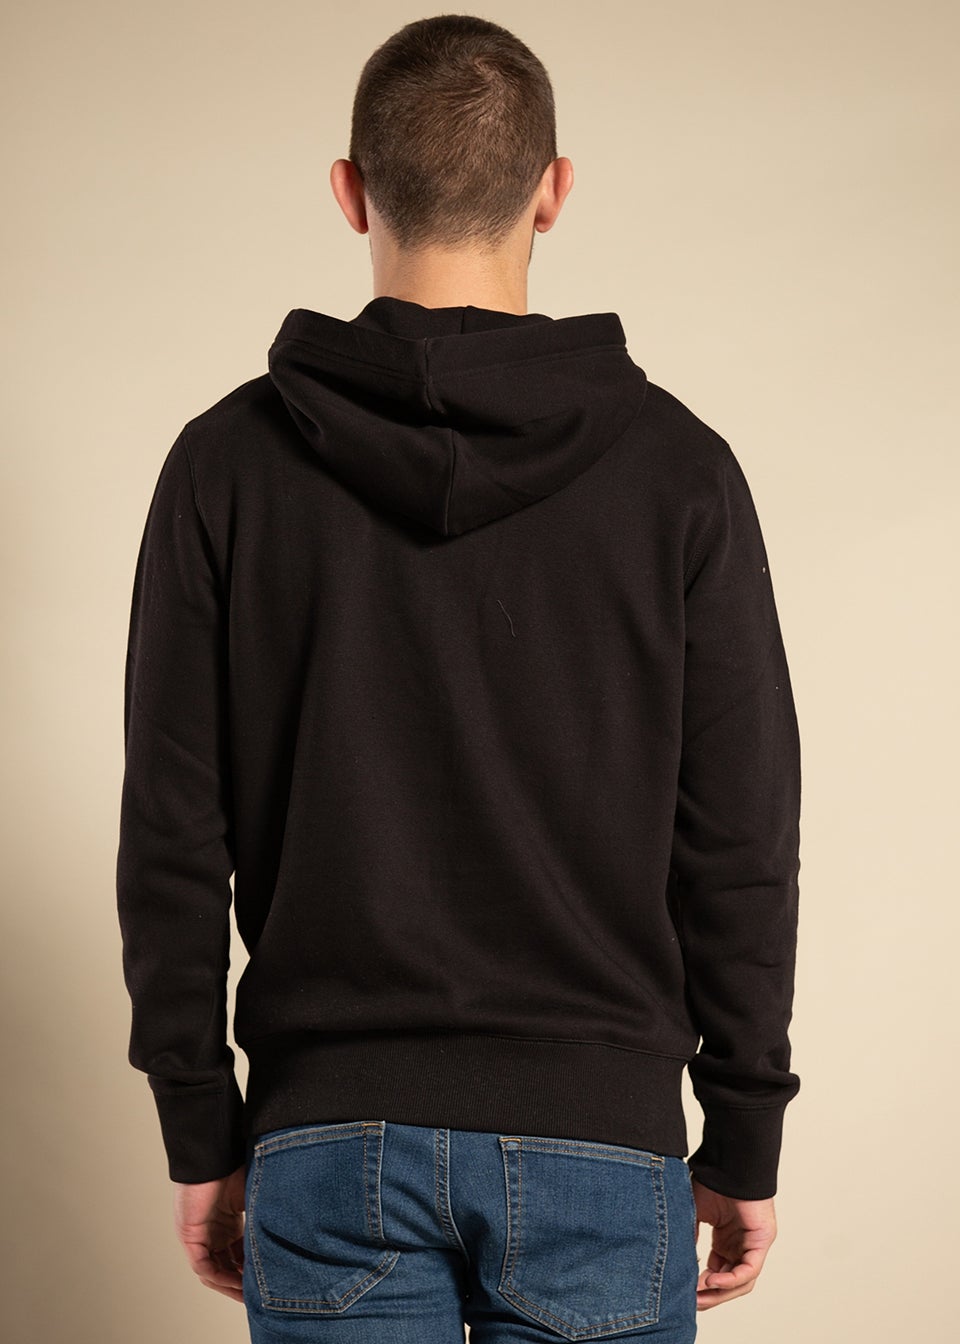 French Connection Black Cotton Blend FCUK Hoody